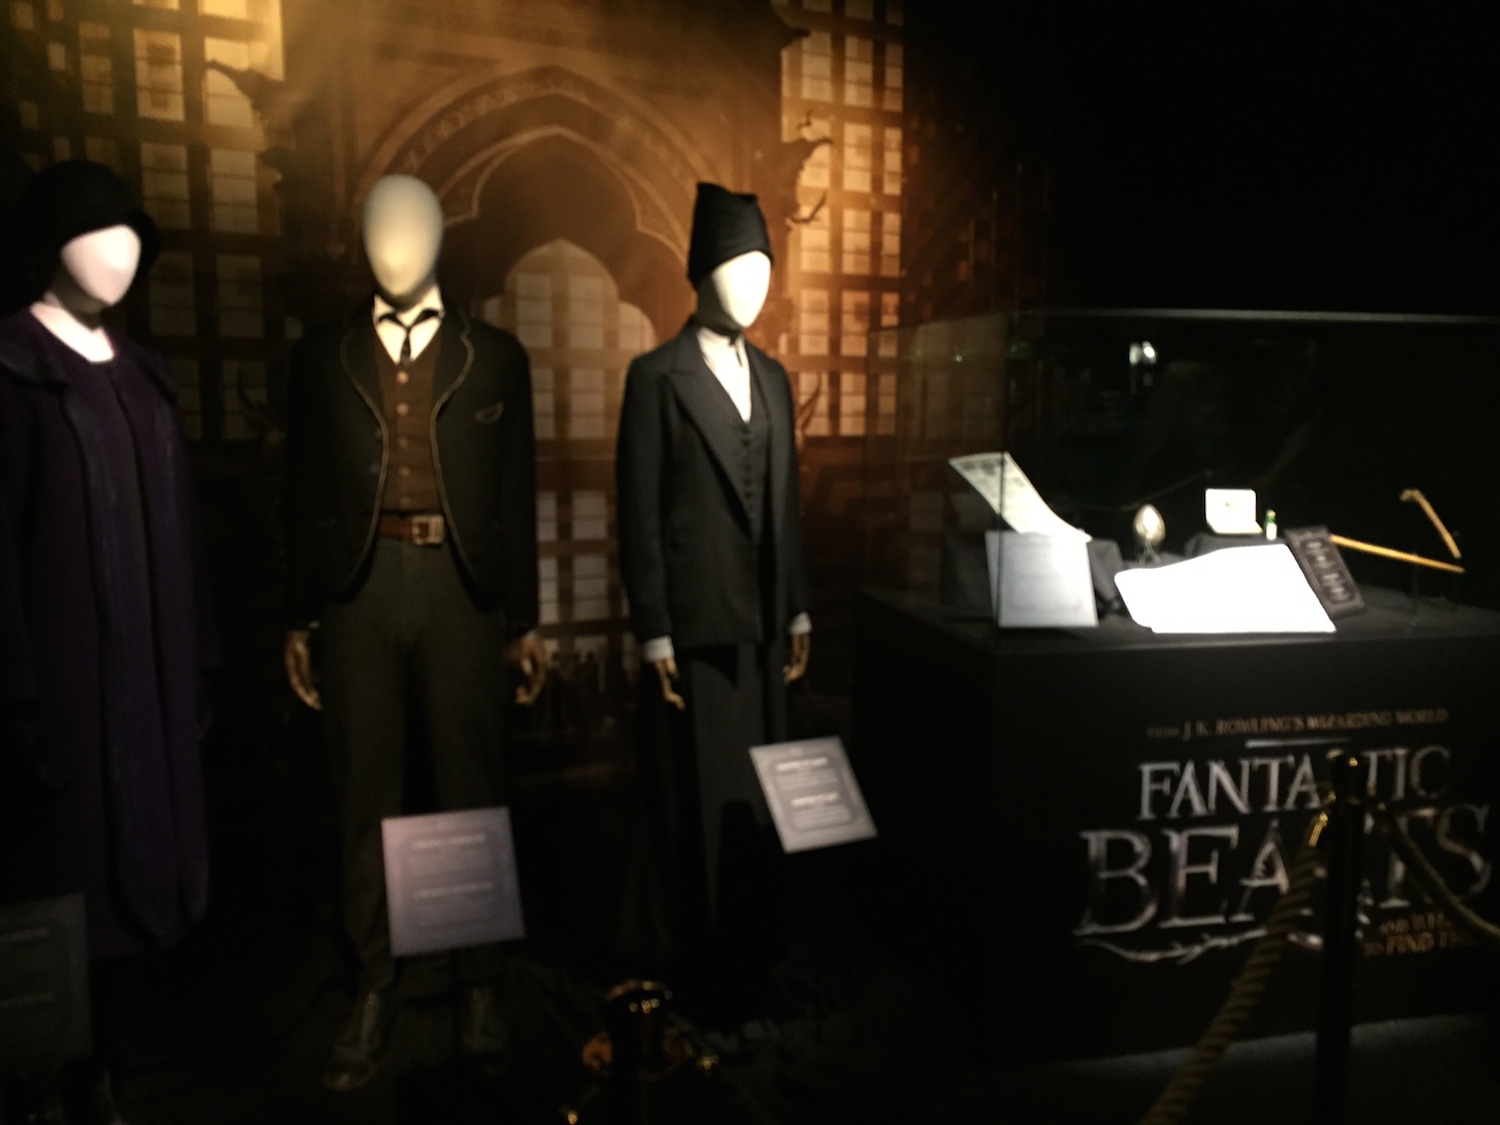 Costumes from “Fantastic Beasts and Where to Find Them”